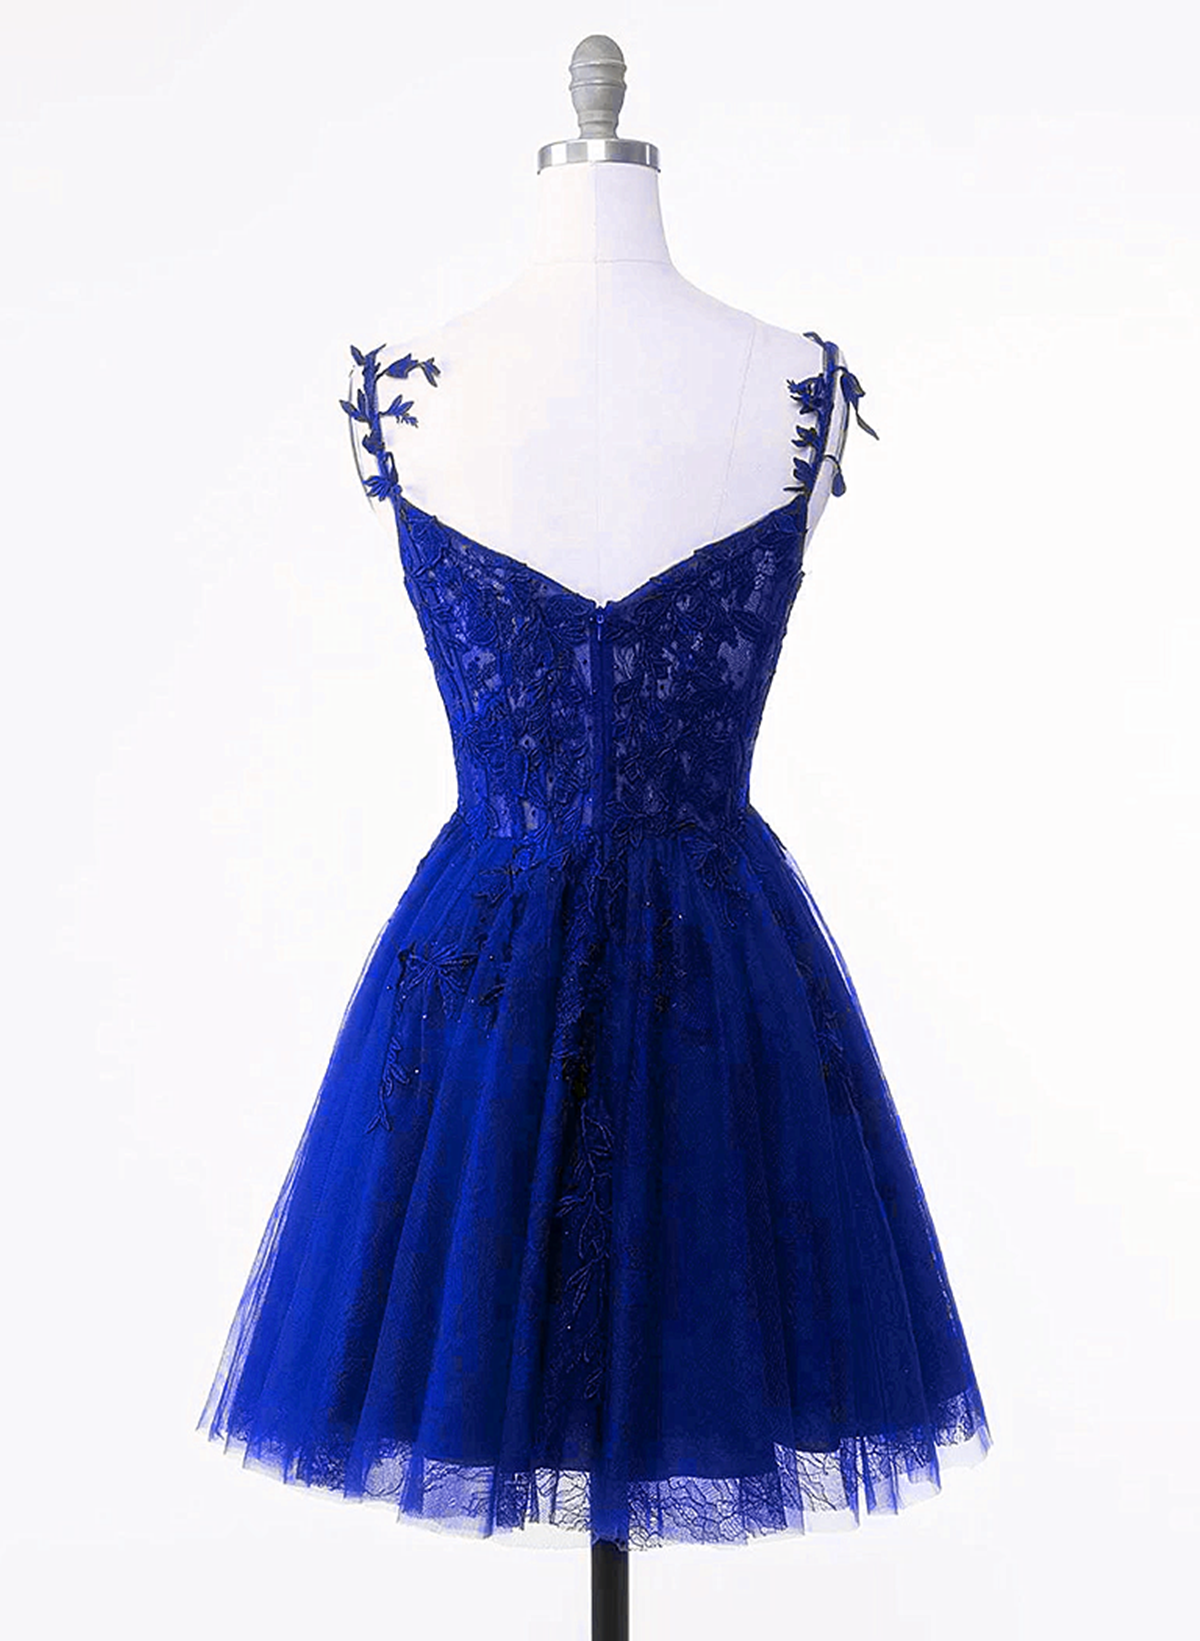 Royal Blue Tulle with Lace Straps Homecoming Dress, Royal Blue Short Prom Dress